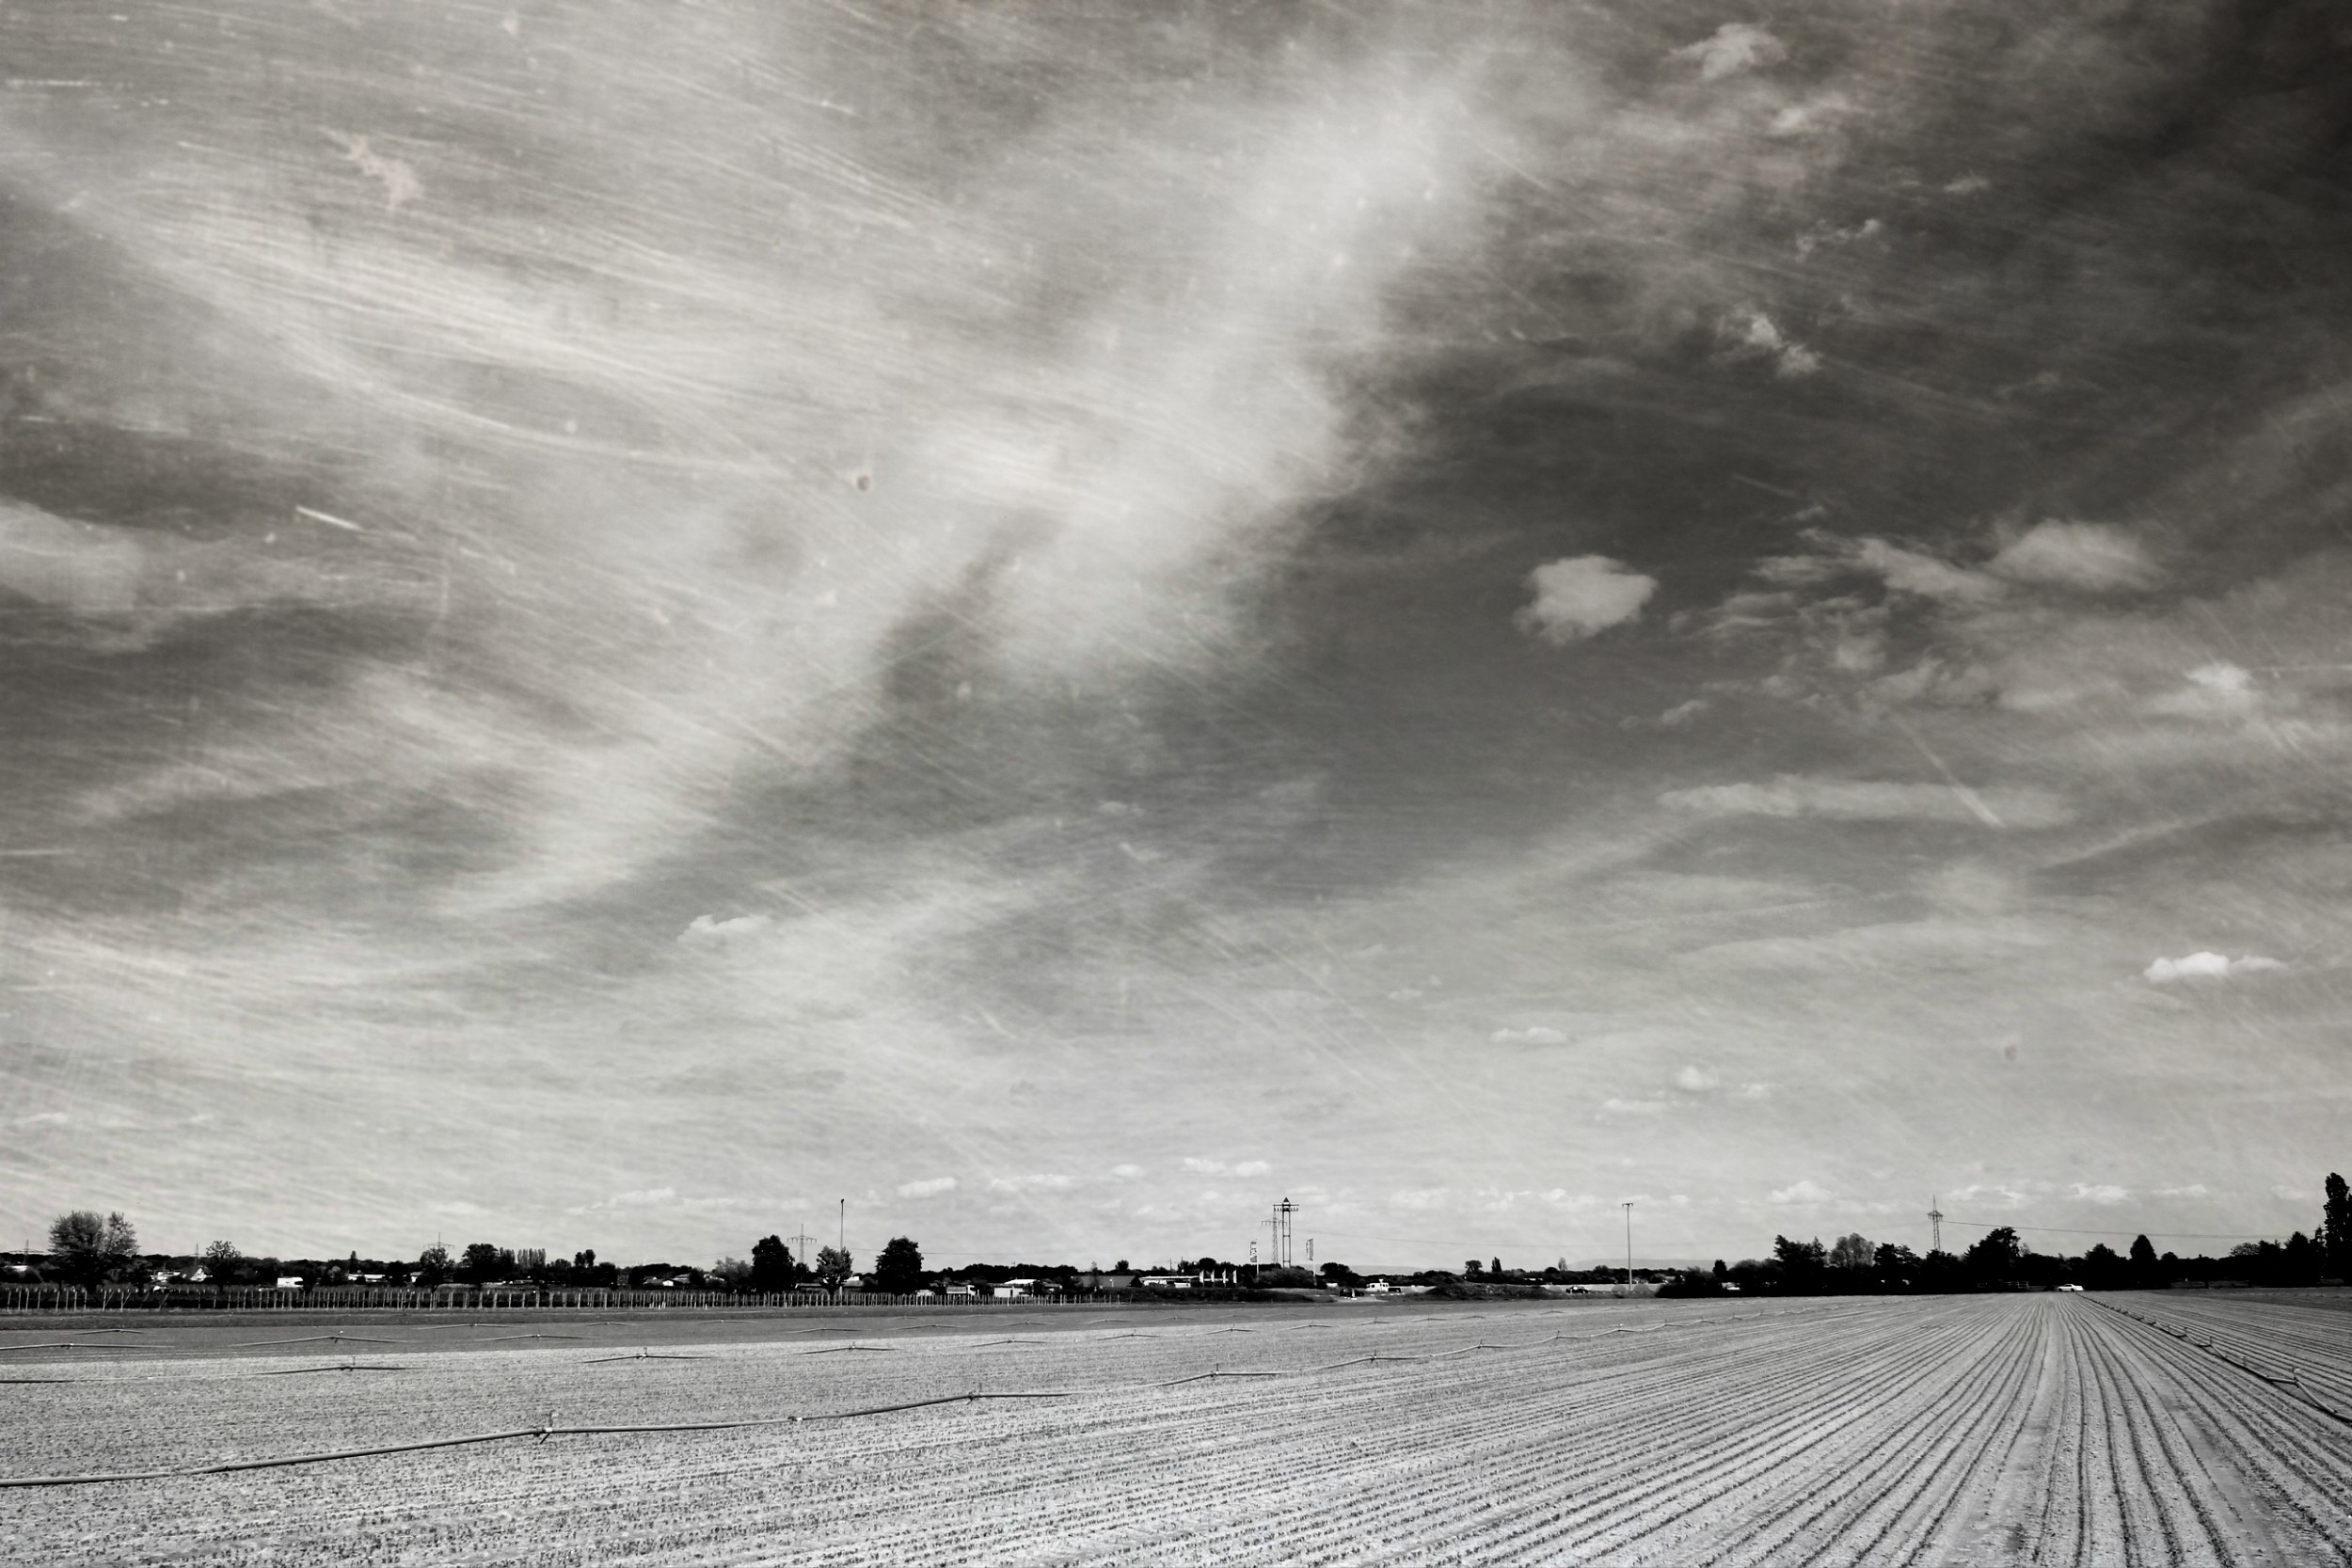 General 2500x1667 nature Earth monochrome field sky clouds